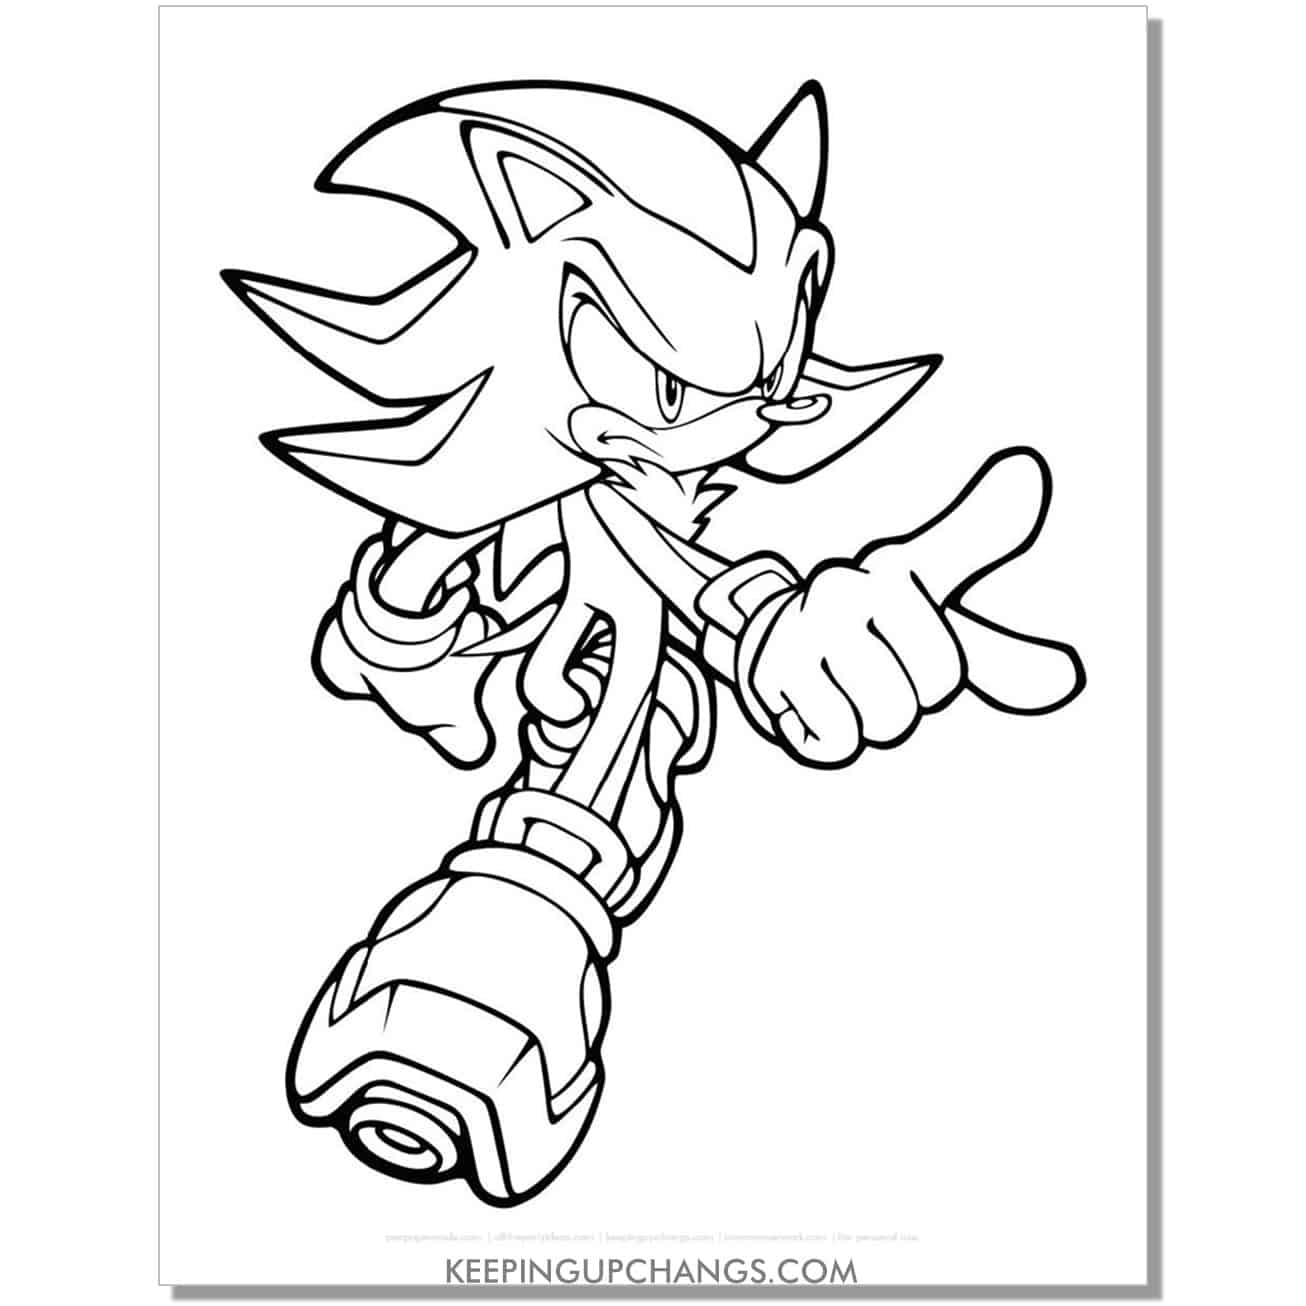 shadow sonic pointing index finger coloring page.